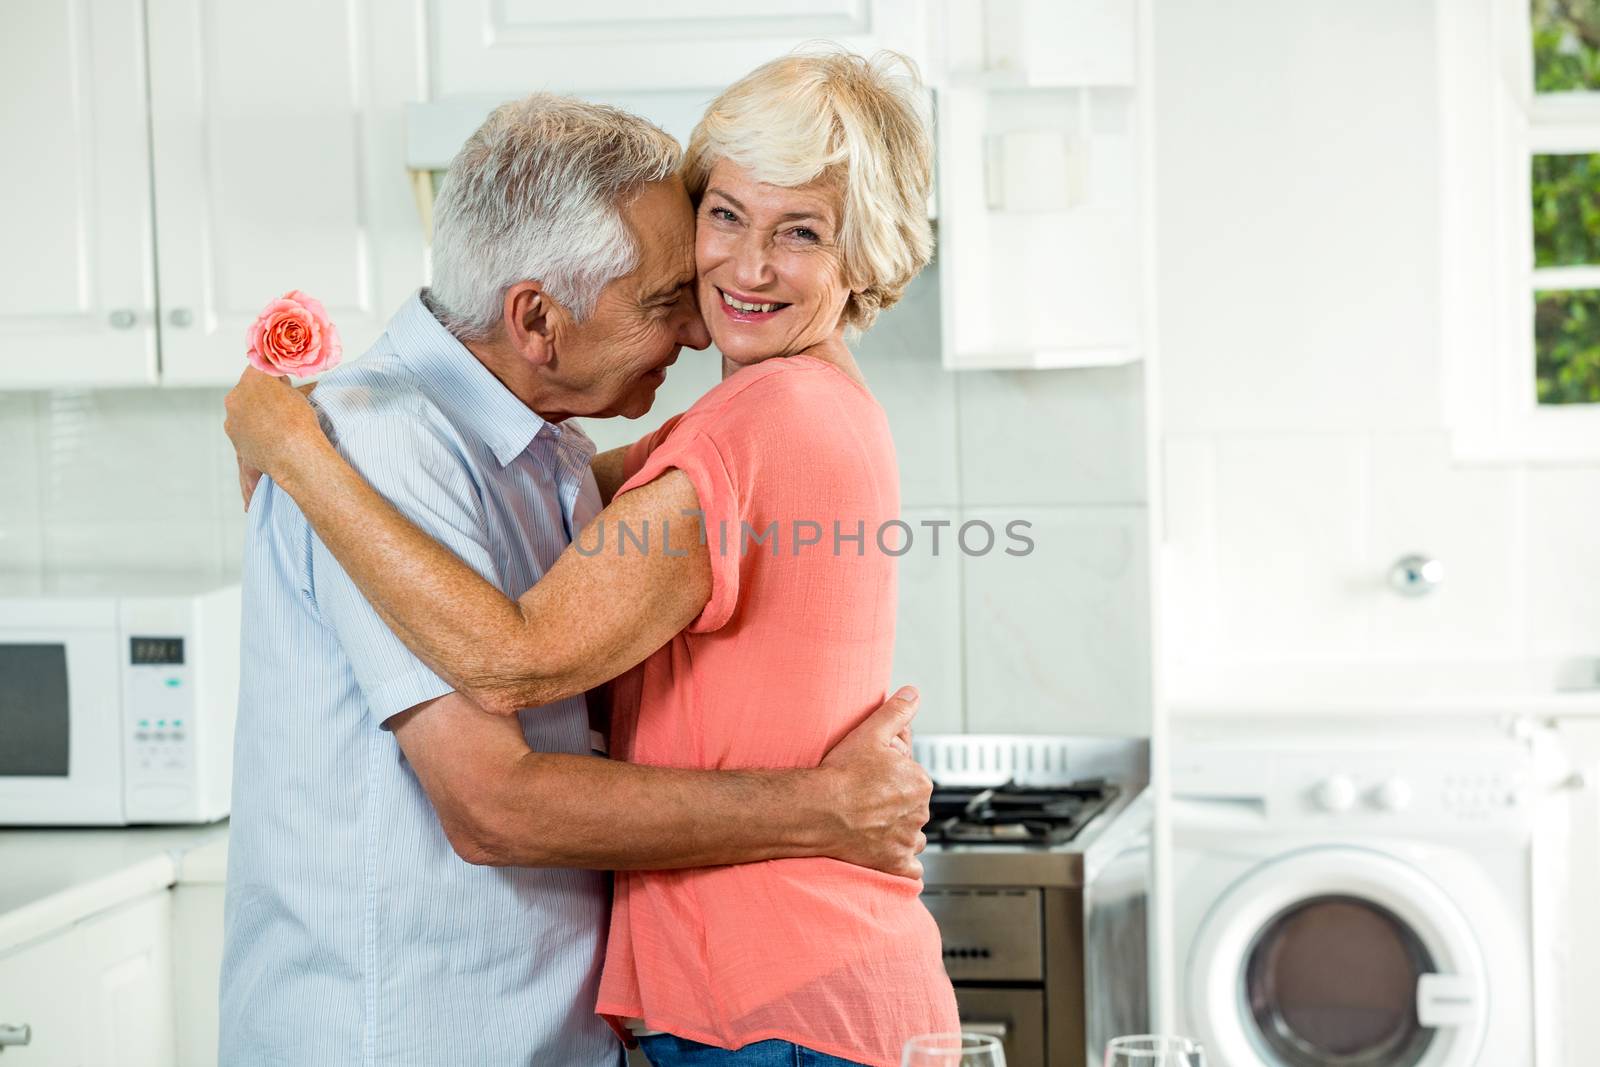 Romantic senior couple with rose while standing in kitchen